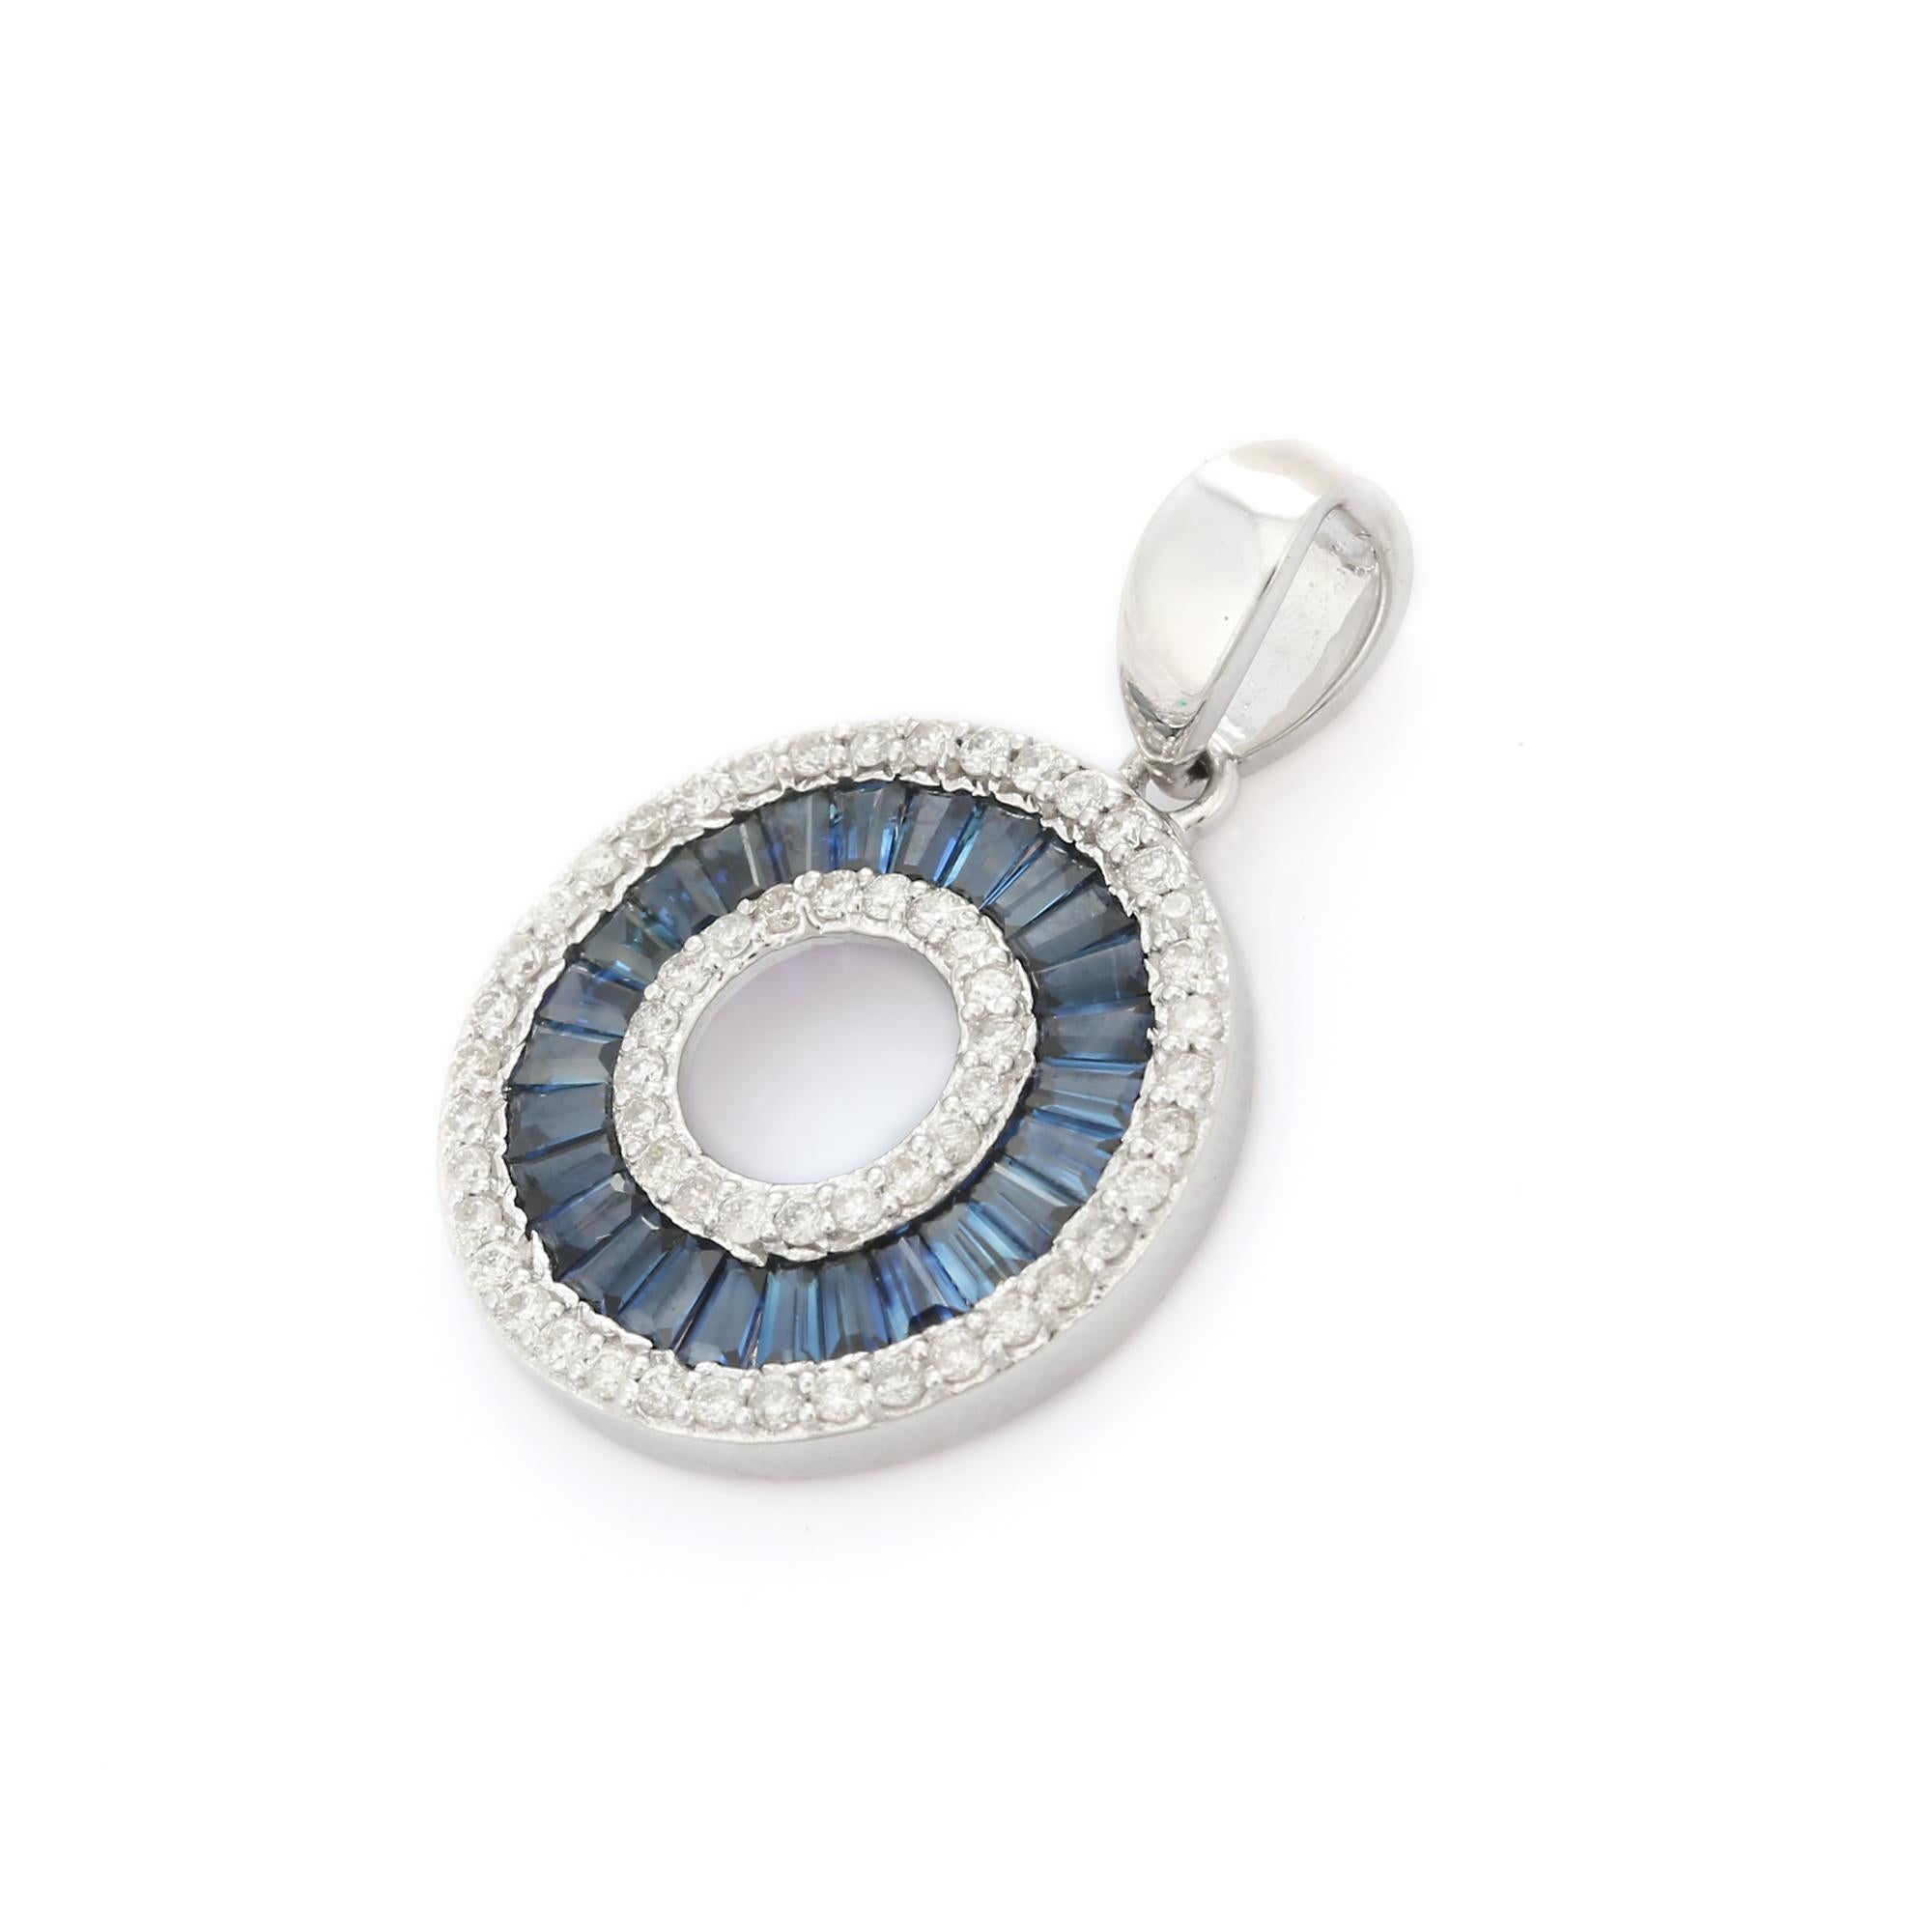 Blue Sapphire pendant in 14K Gold. It has a baguette cut Blue sapphires studded with diamonds that completes your look with a decent touch. Pendants are used to wear or gifted to represent love and promises. It's an attractive jewelry piece that